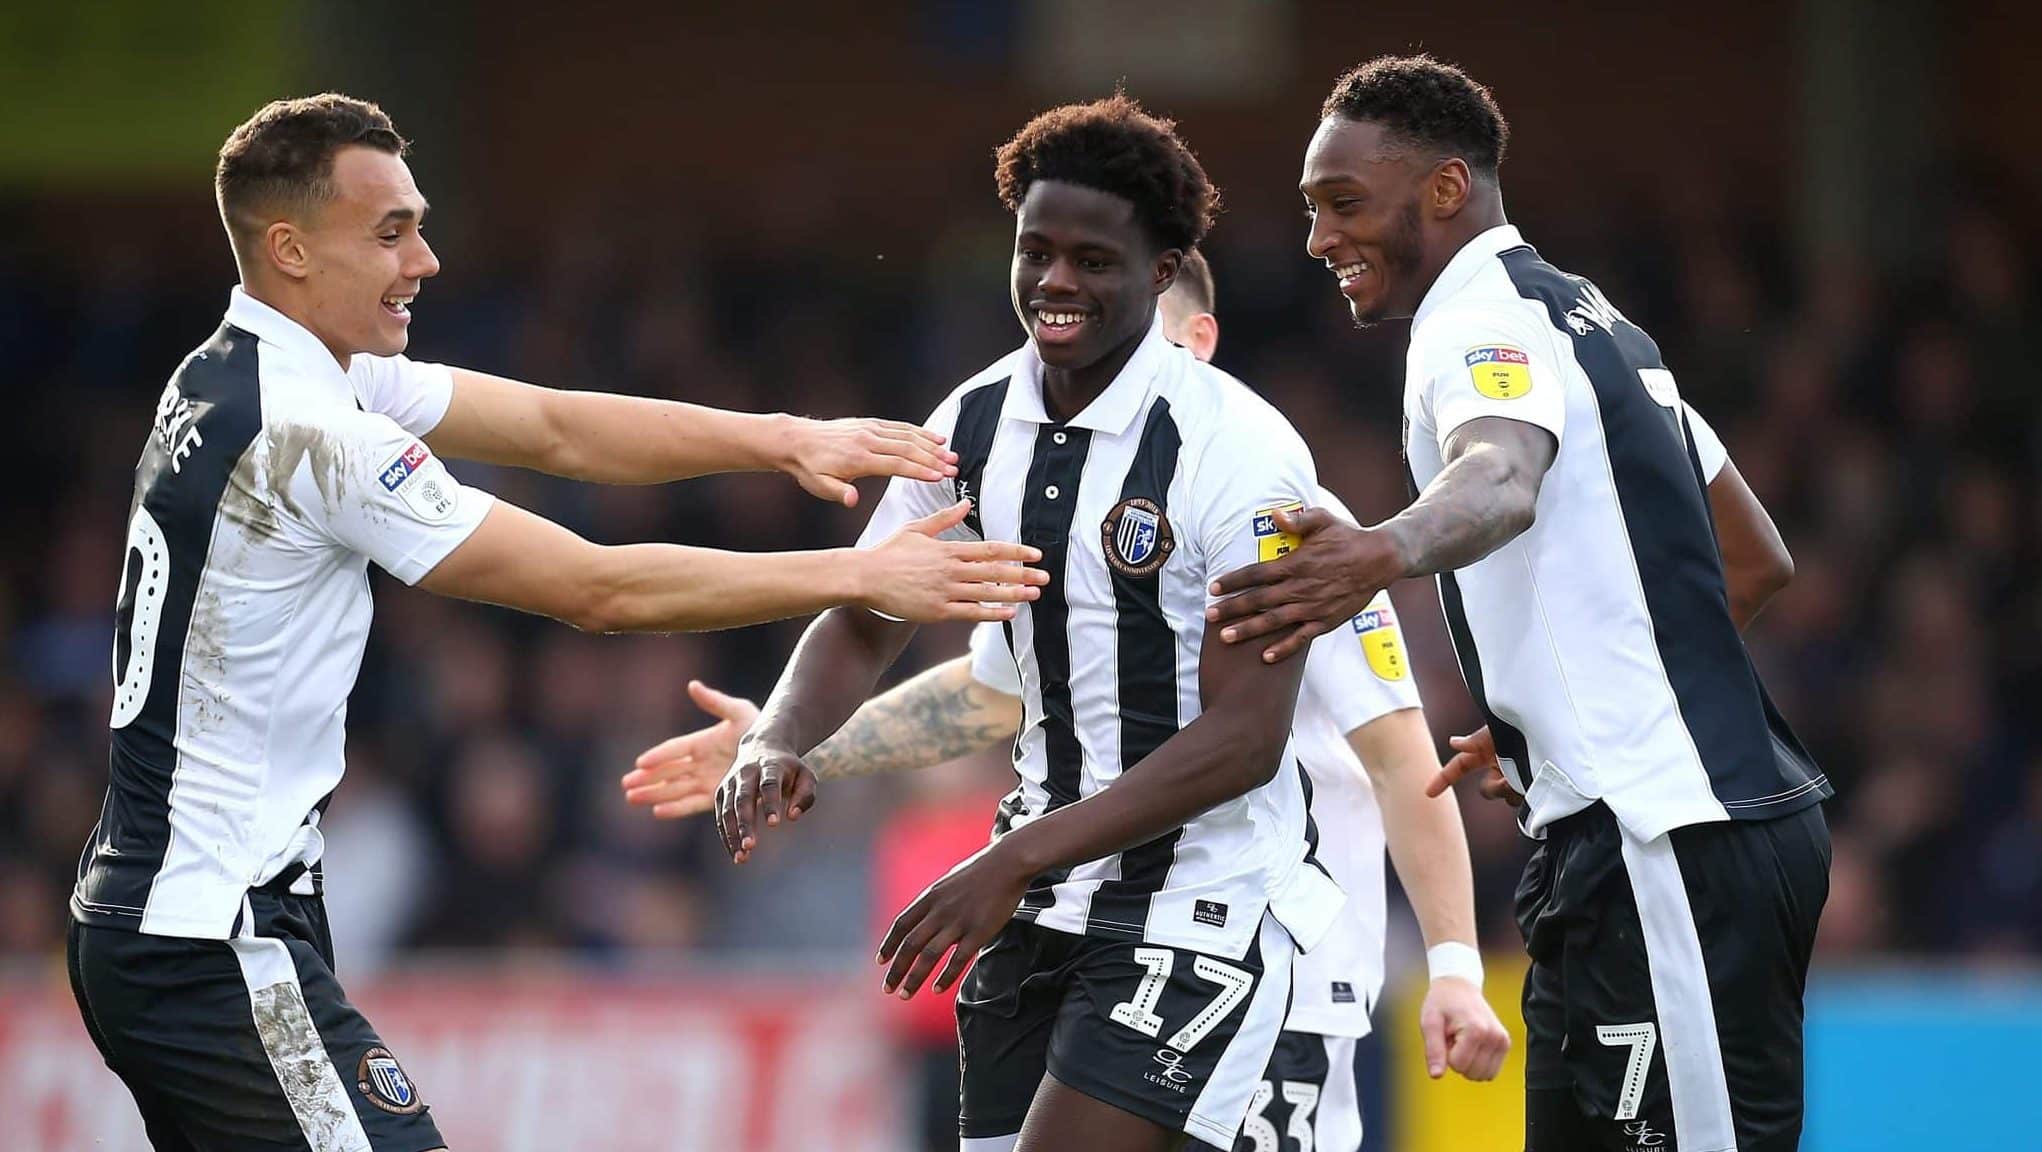 KINGSTON UPON THAMES, ENGLAND - MARCH 23: Leonardo Da Silva Lopes of Gillingham celebrates with his teammates after scoring his sides third goal during the Sky Bet League One match between AFC Wimbledon and Gillingham at The Cherry Red Records Stadium on March 23, 2019 in Kingston upon Thames, United Kingdom.